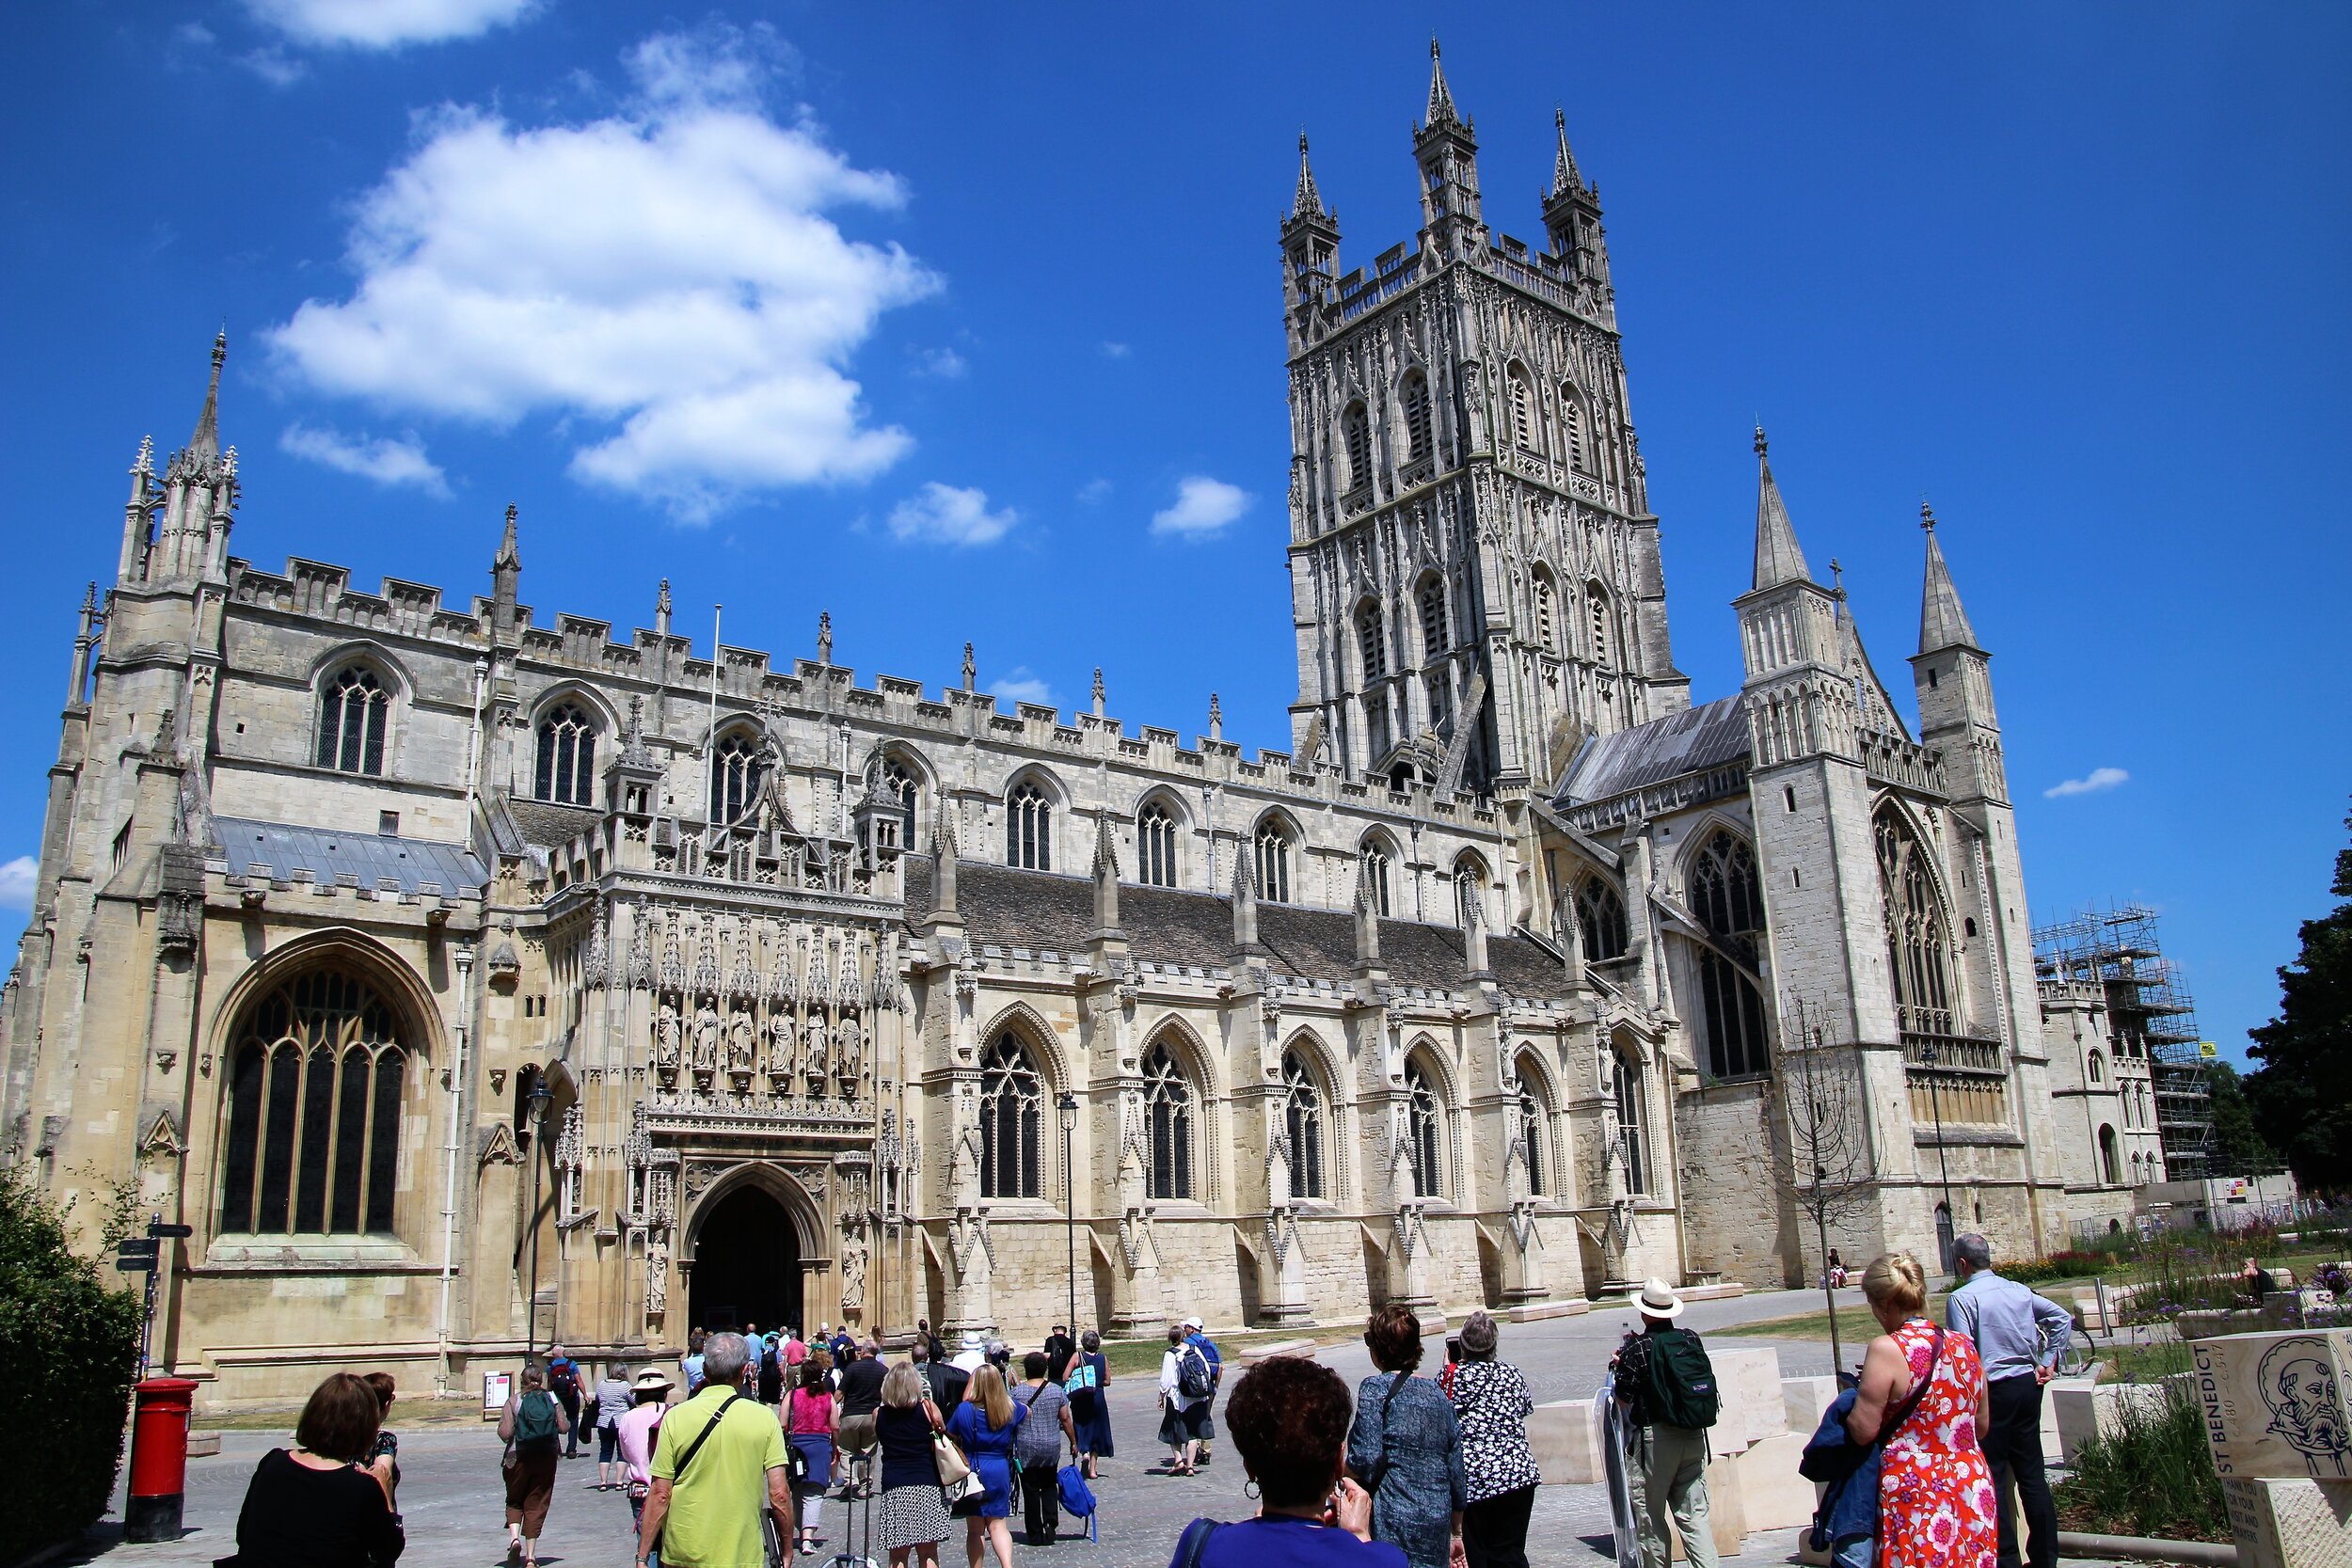 Entering Gloucester Cathedral (photo: Jay Labov)